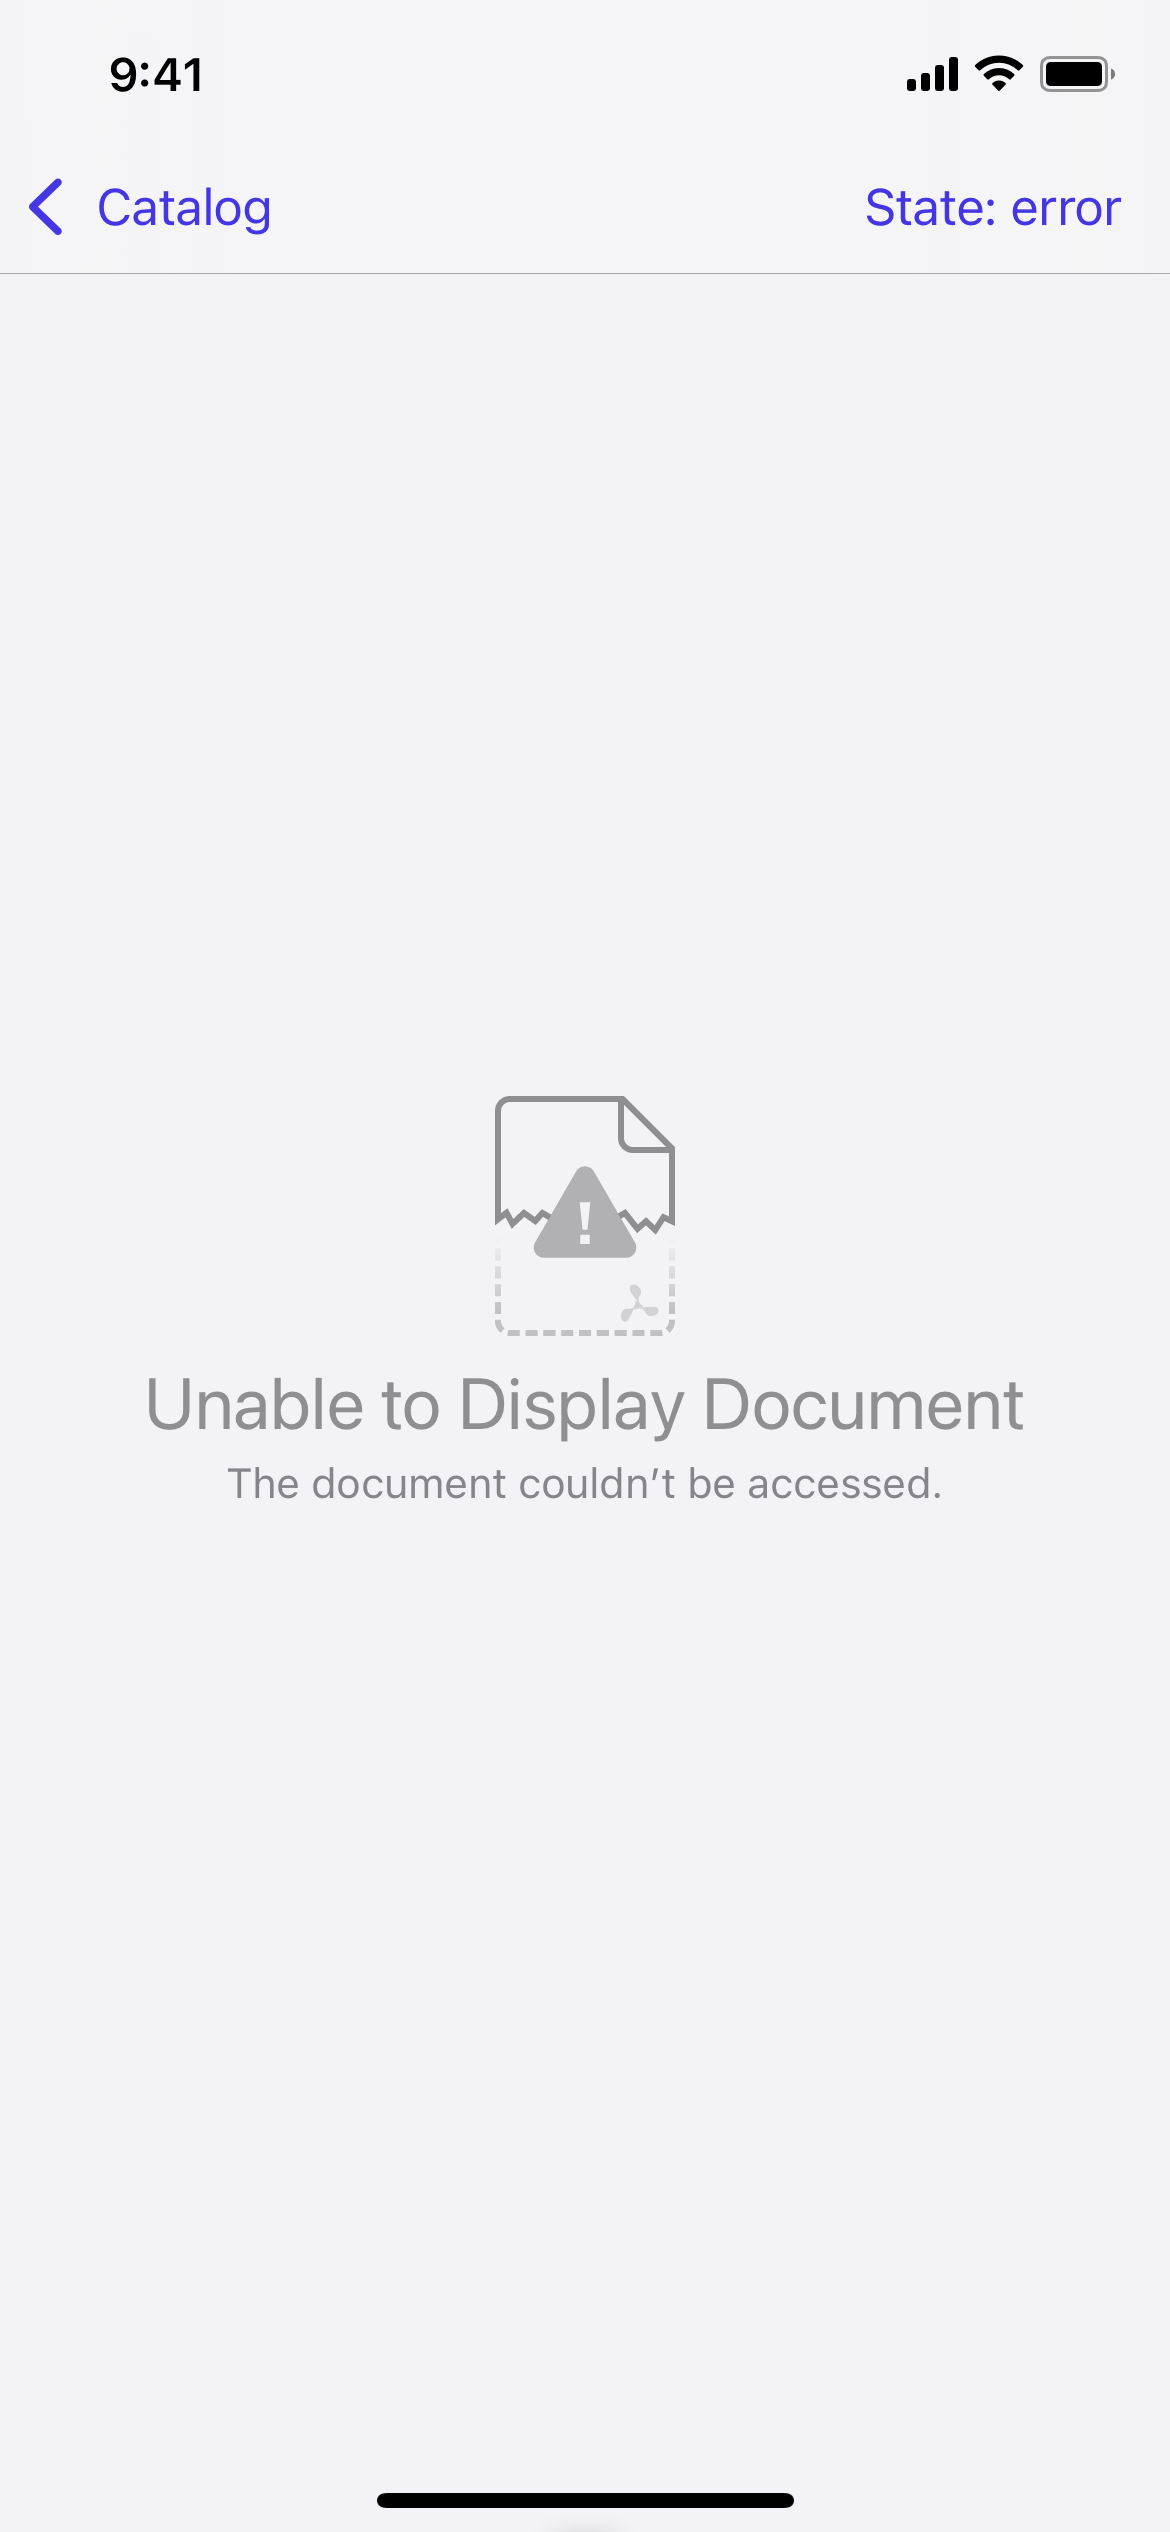 Screenshot of error state with error message “Unable to Display Document: The document couldn’t be accessed.”